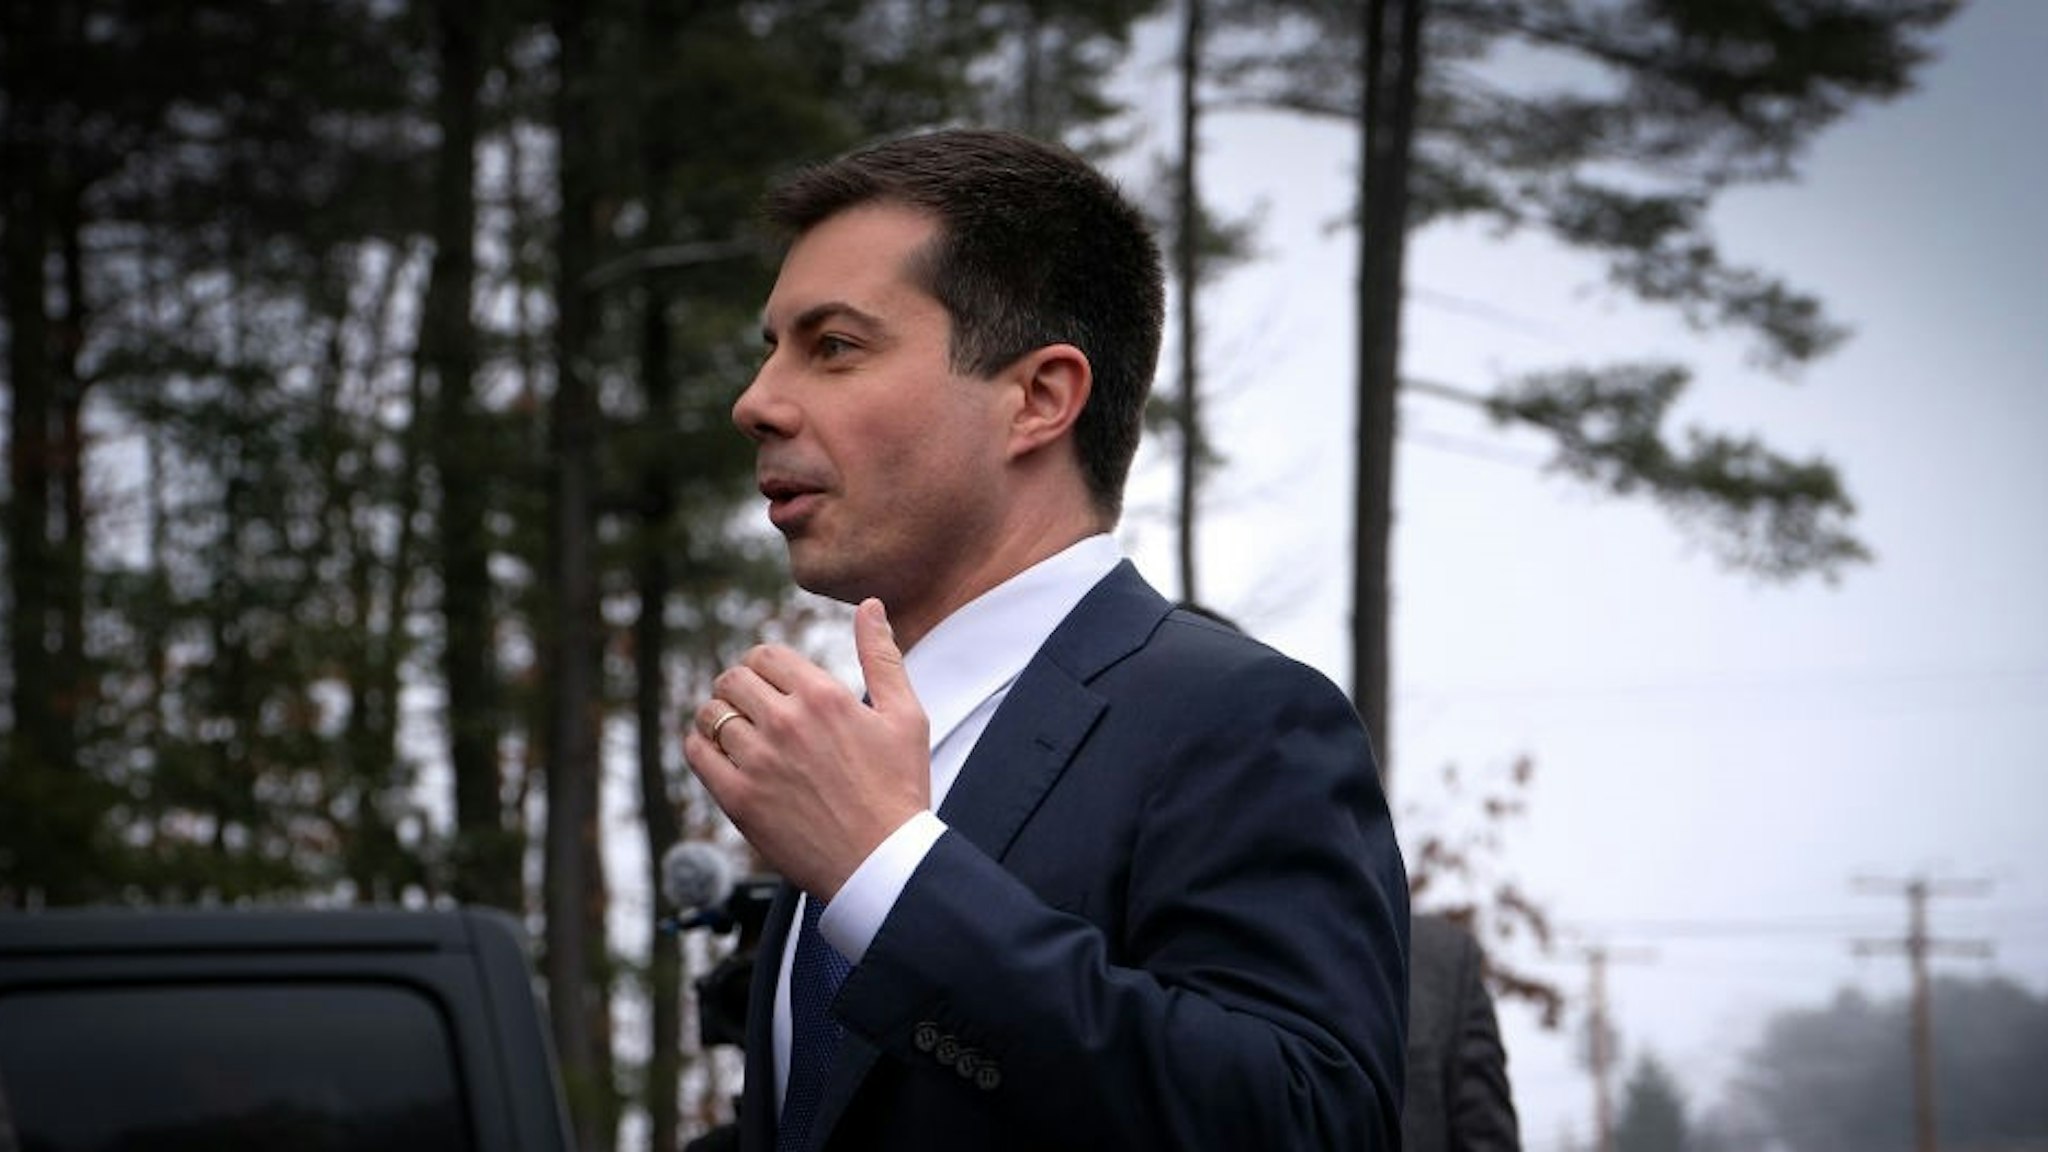 MERRIMACK, UNITED STATES - FEBRUARY 6, 2020: Democratic presidential candidate Pete Buttigieg arrives to an overflowing American Legion Post 98, and addresses his supporters in Merrimack.- PHOTOGRAPH BY Preston Ehrler / Echoes Wire/ Barcroft Media (Photo credit should read